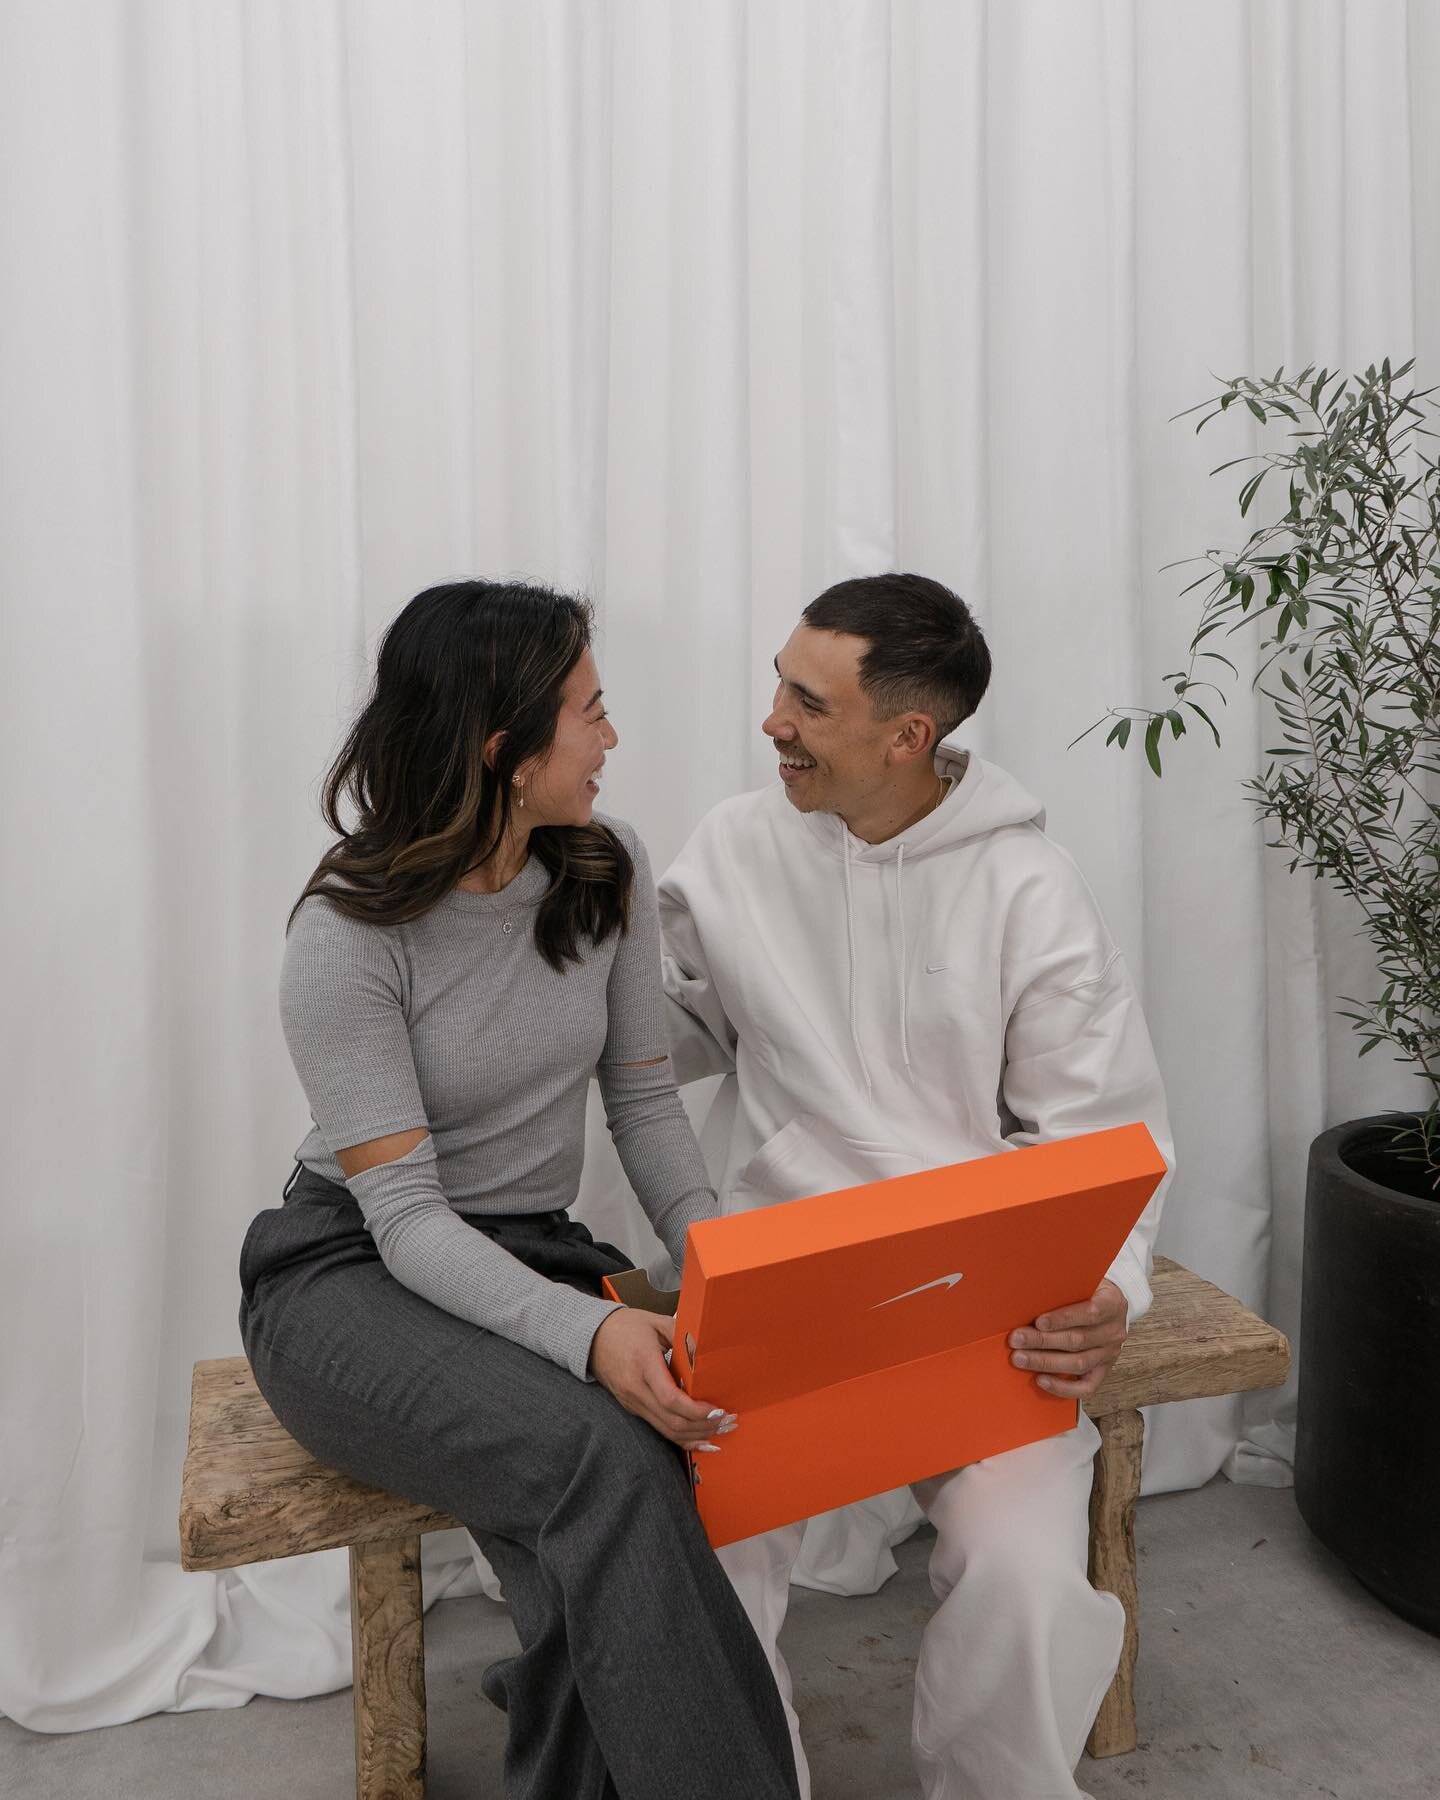 Spoiling my man this holiday season with the best gifts from @nike! These are some of his favorite running shorts + shoes, and the coziest hoodie set! I might have to get myself one too&hellip; #ad #teamnike